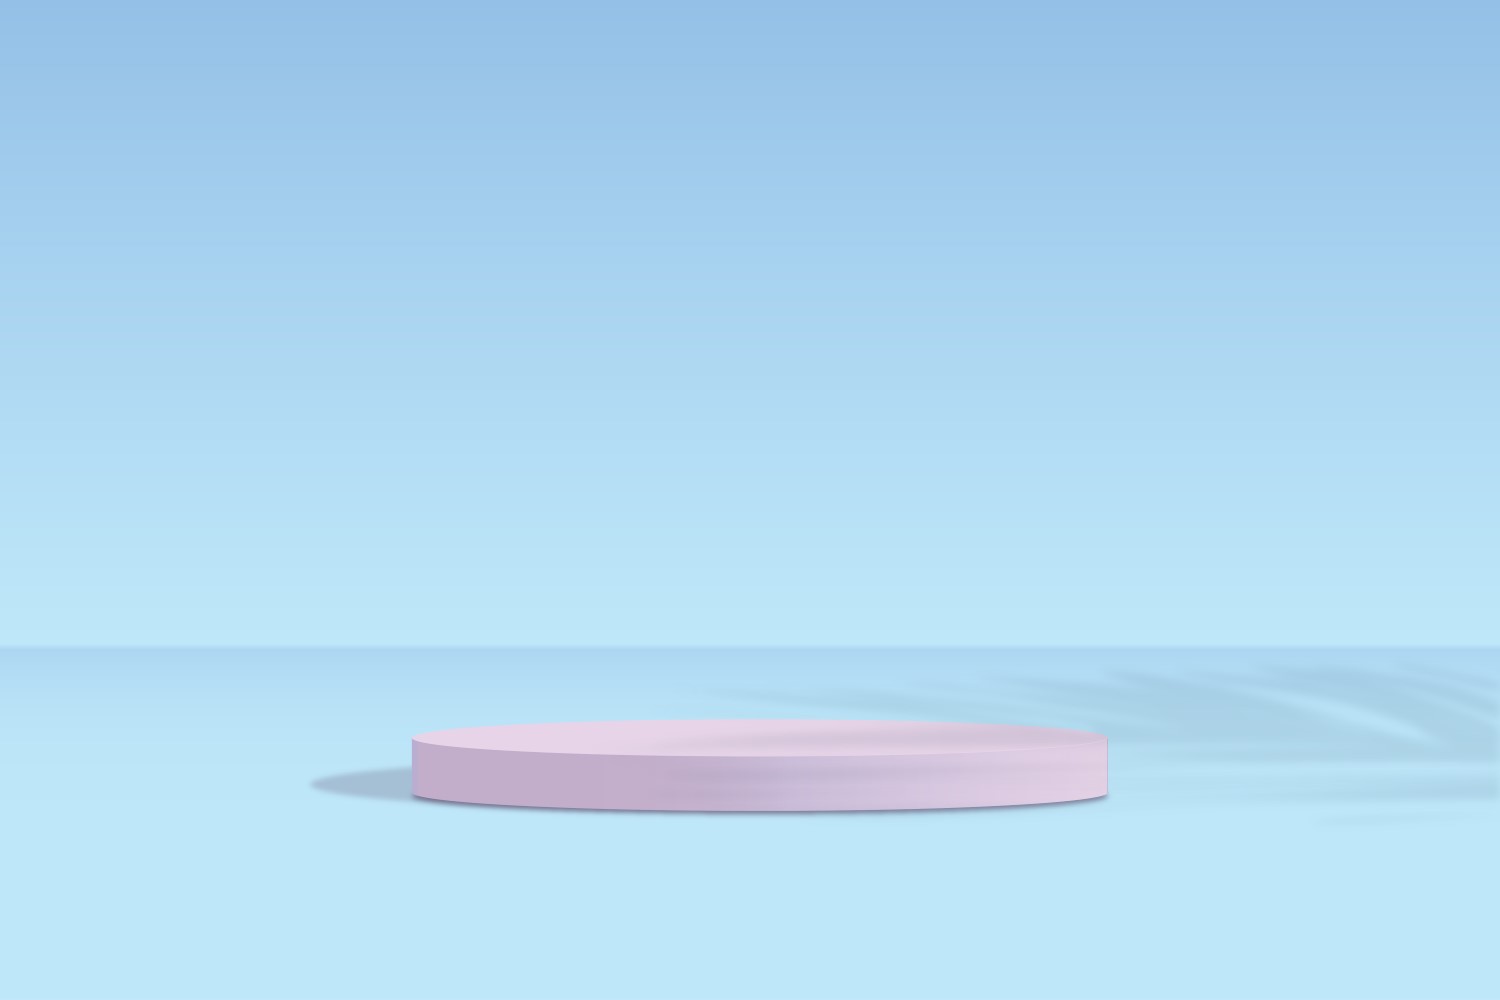 Circular podium stage and blue background 3d rendering